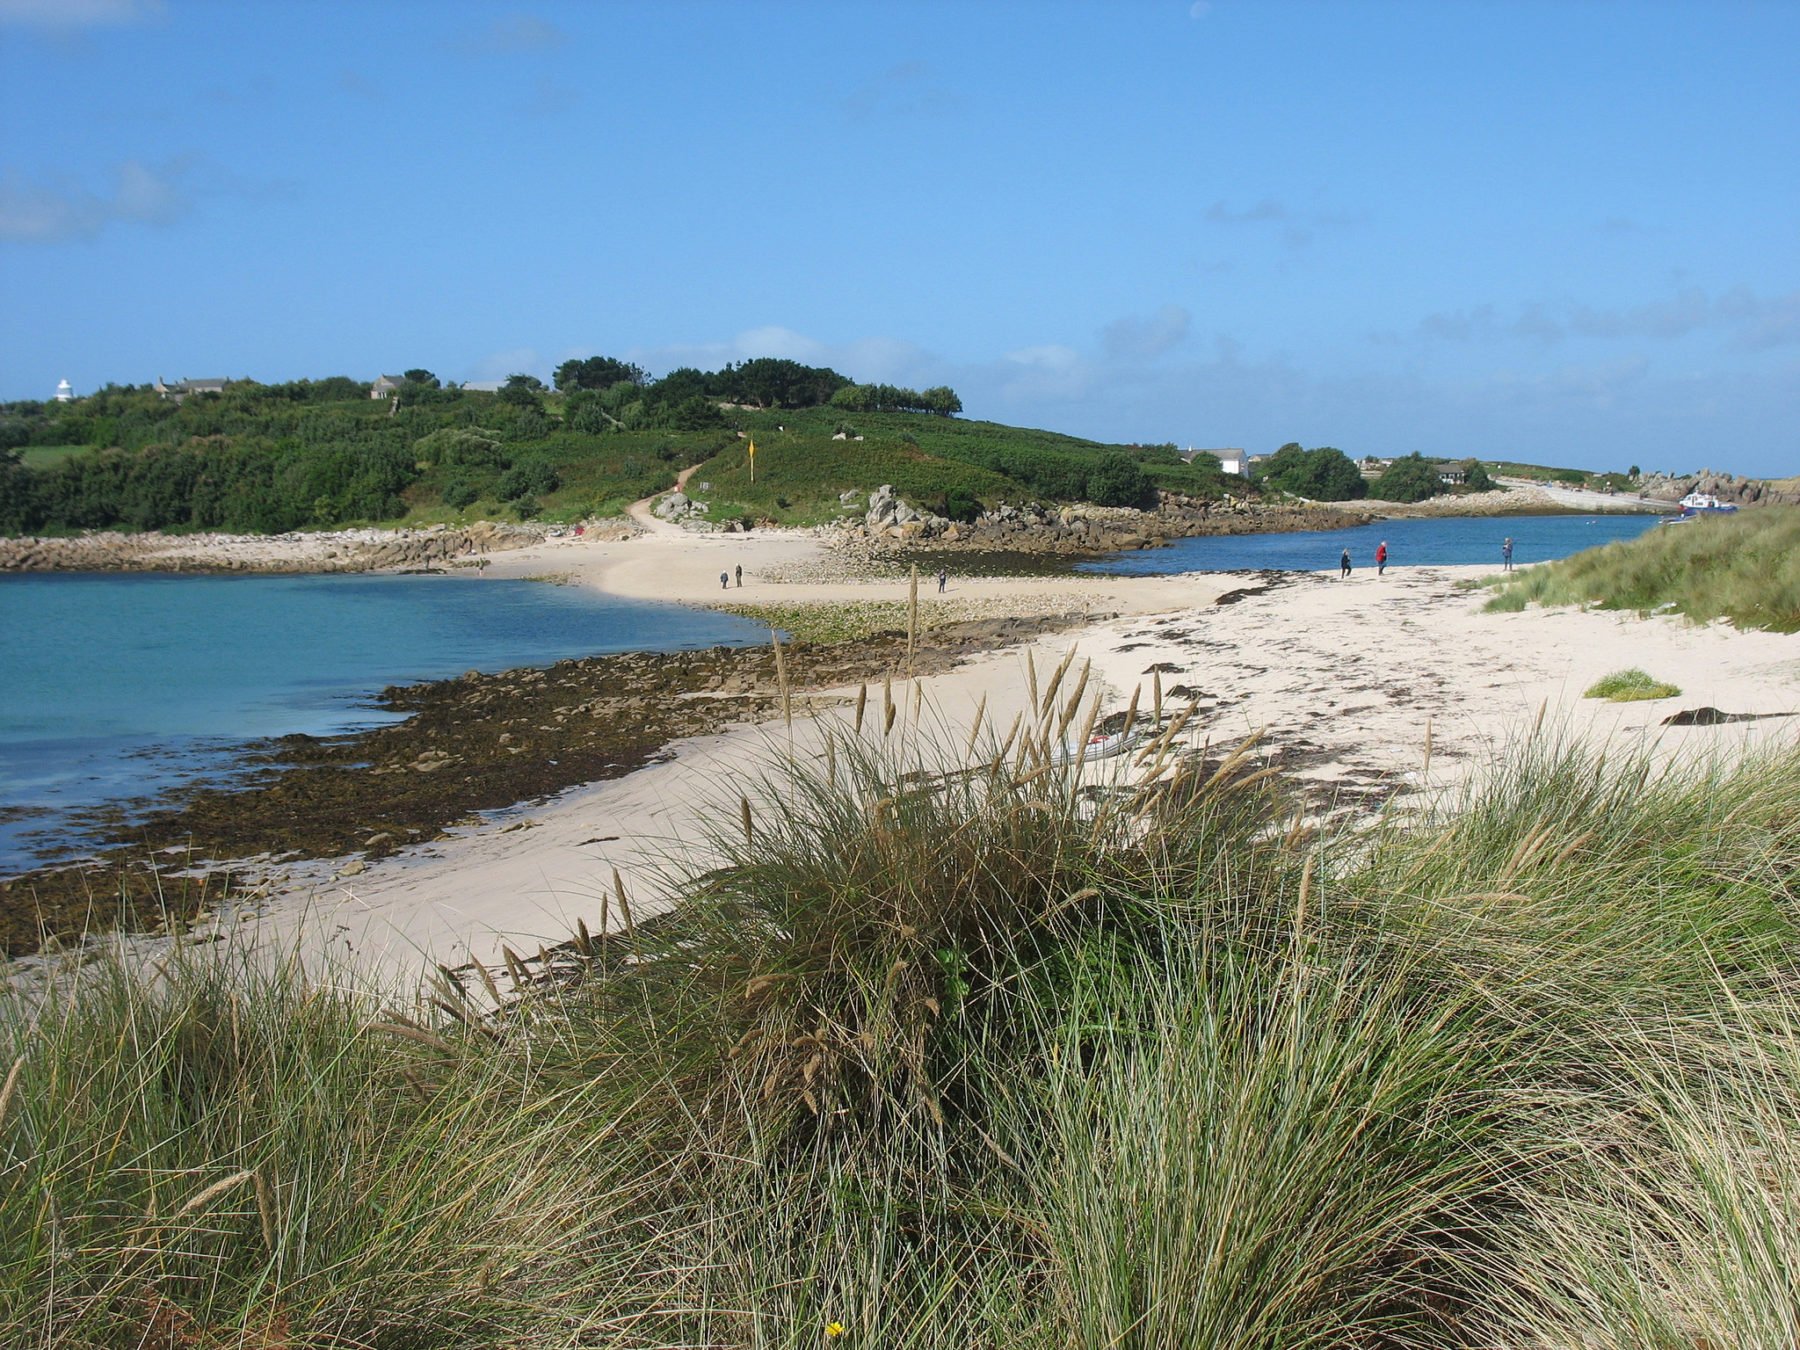 The sandbar between St Agnes and Gugh on the Isles of Scilly